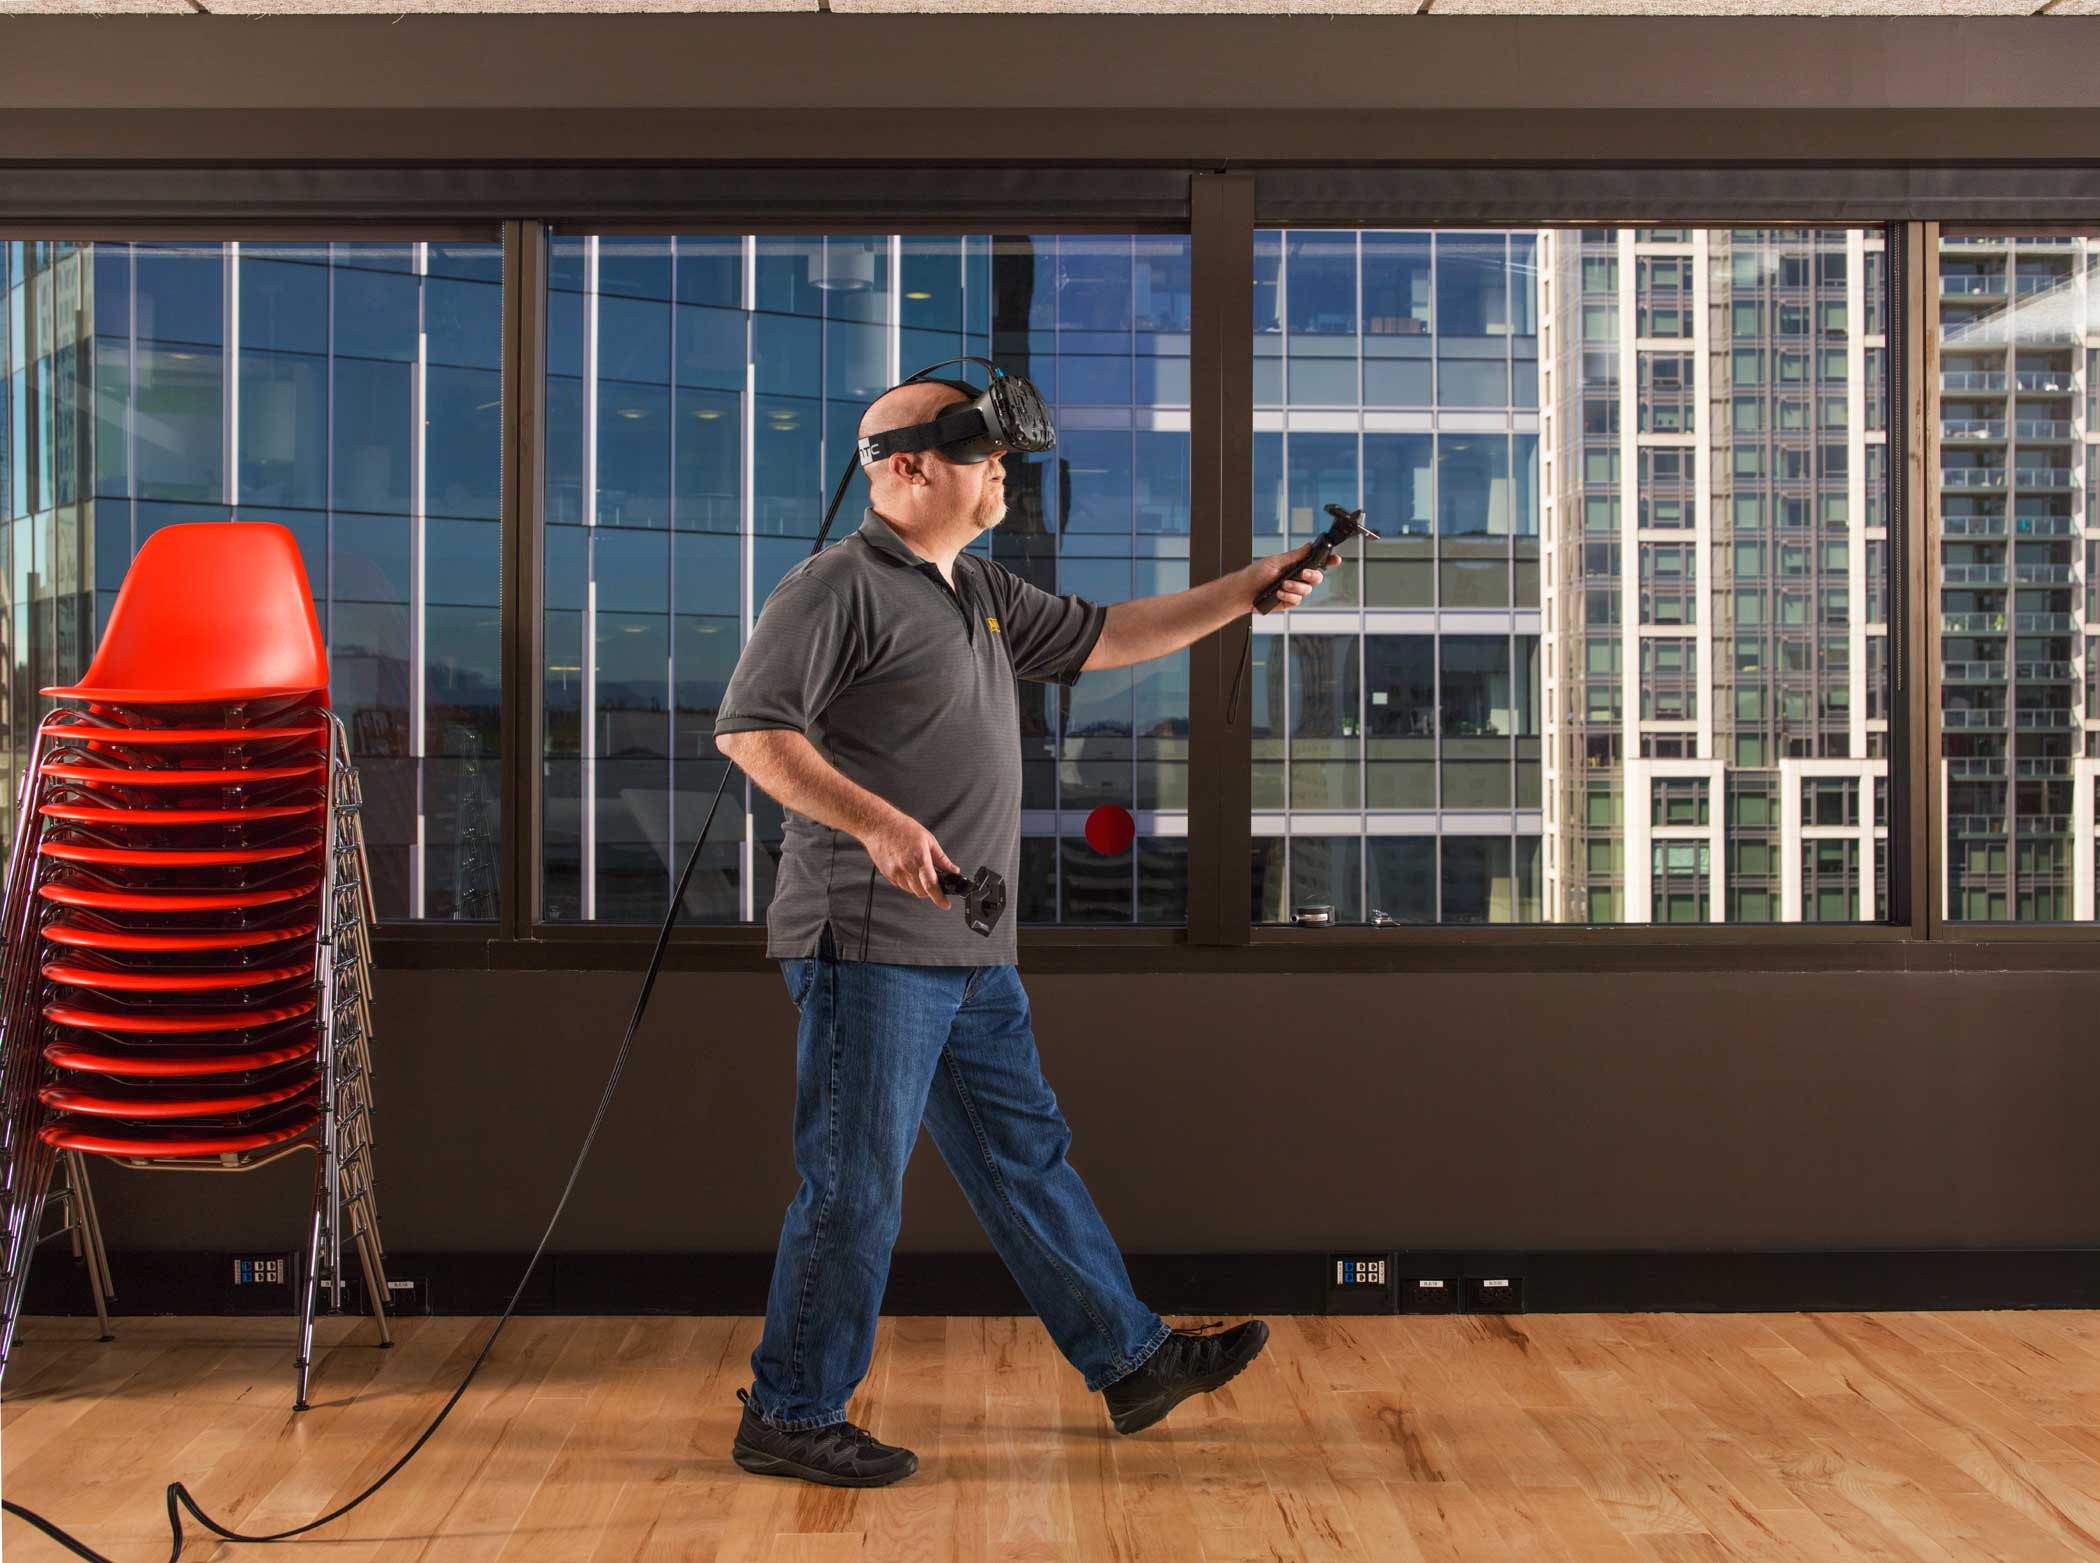 Ken Birdwell, an engineer from valve demonstrates the Vive virtual reality headset at the valve hq in Seattle, WA on June 25, 2015.